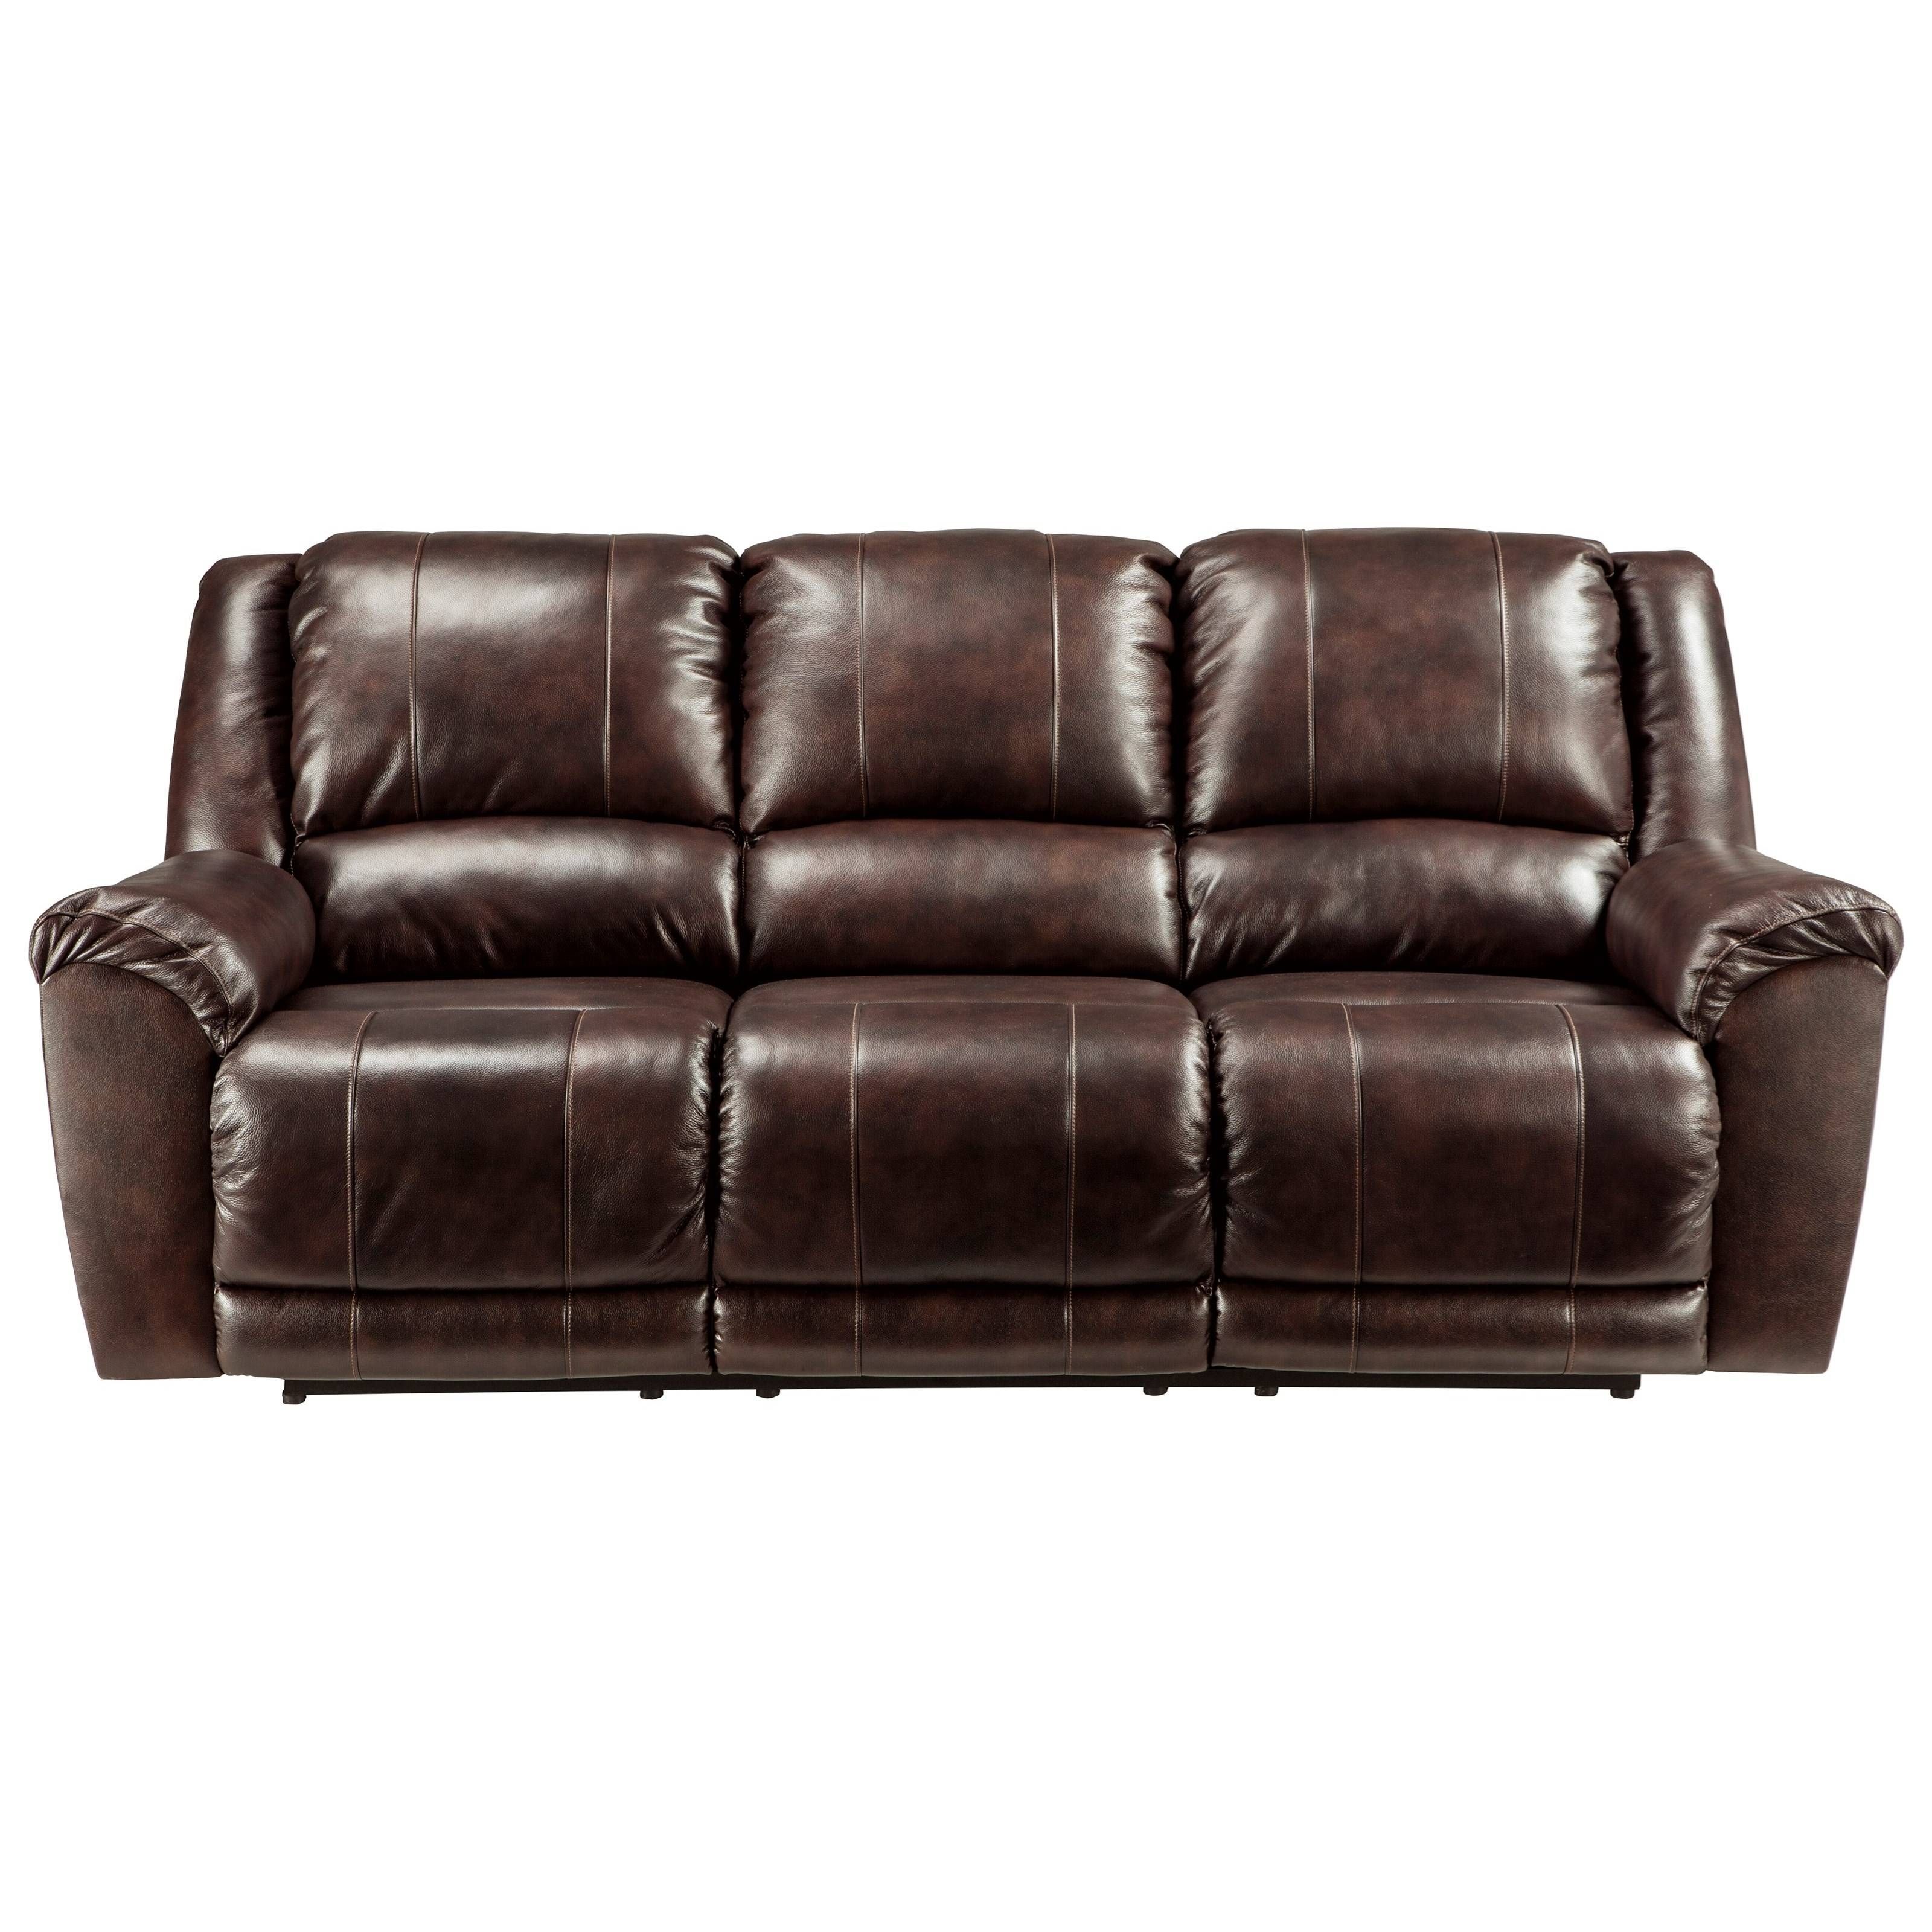 Signature Designashley Yancy Leather Match Reclining Sofa In Recliner Sofa Chairs (View 15 of 30)